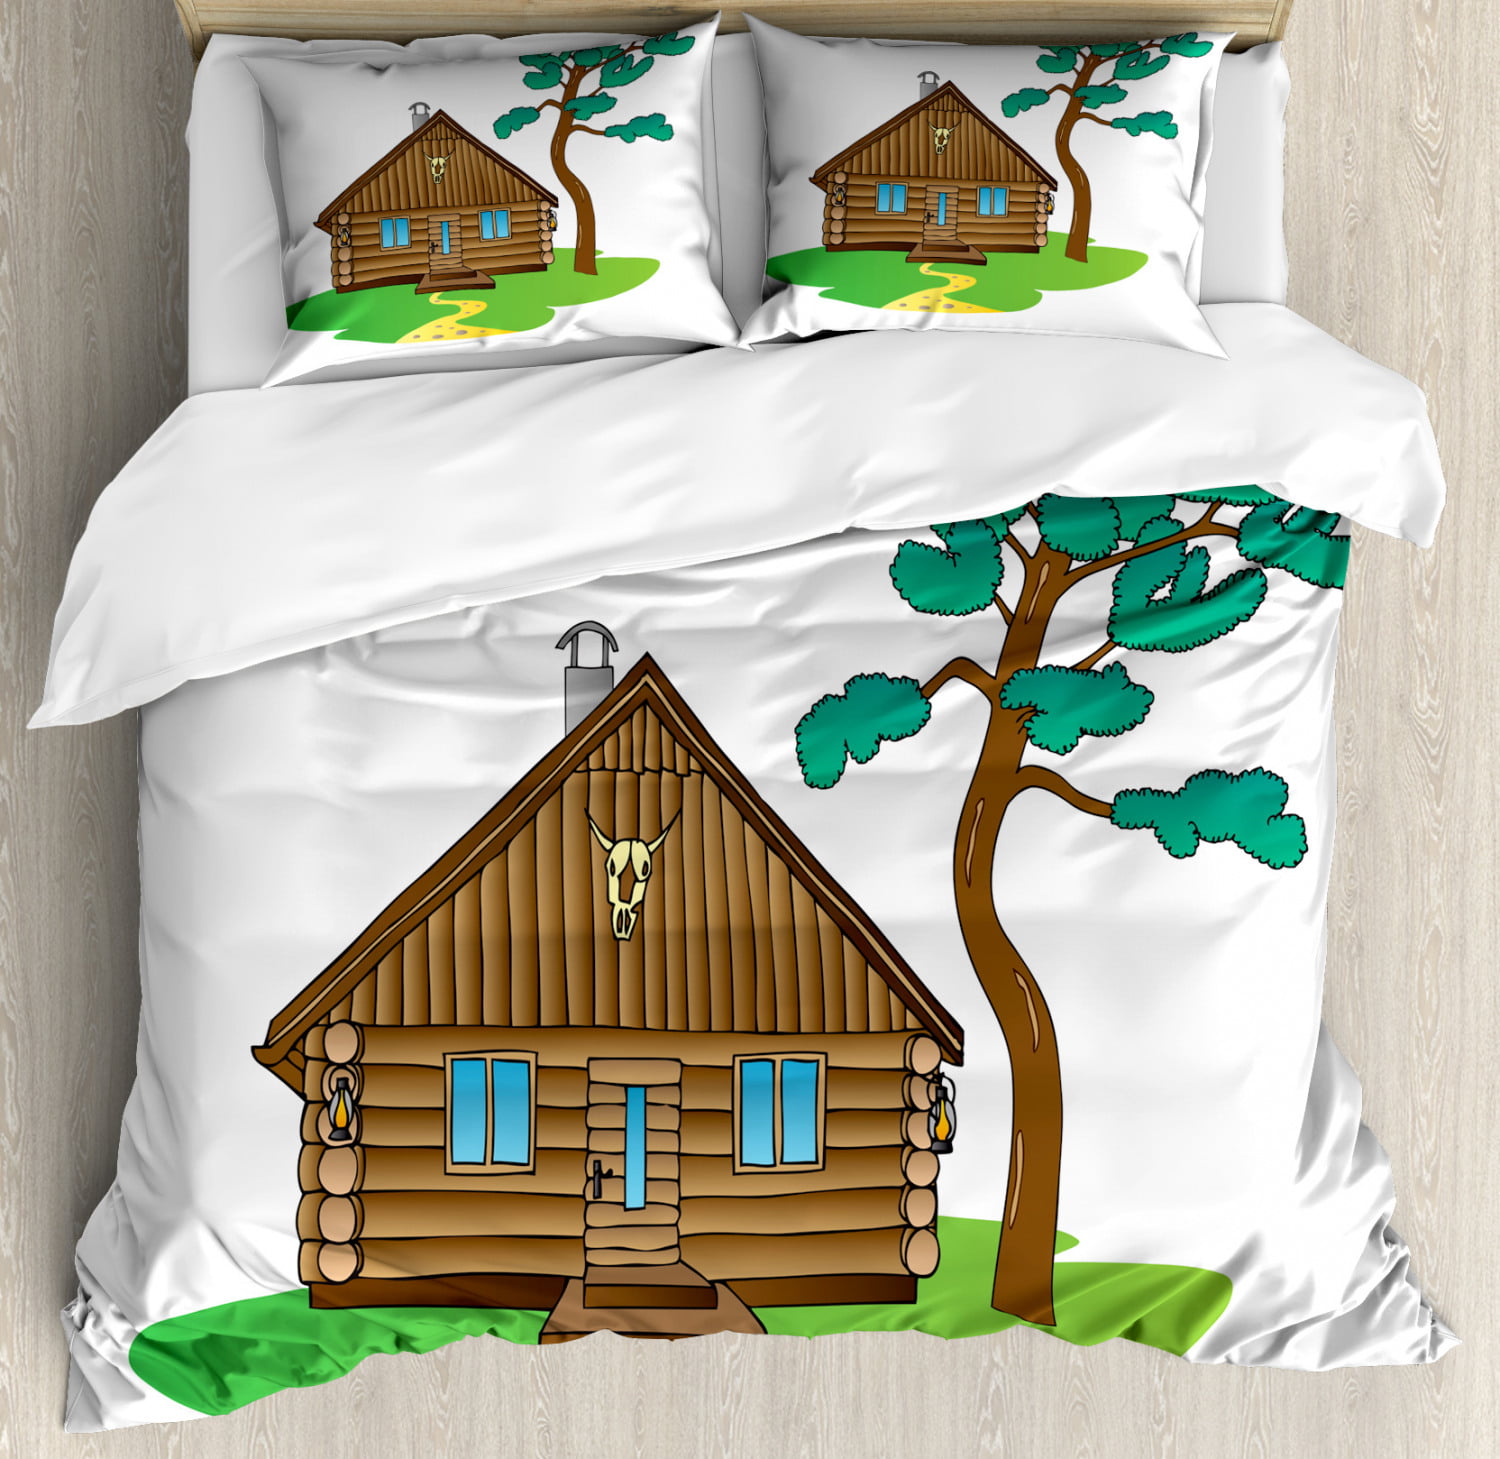 Log Cabin Duvet Cover Set Image Of A Rustic Lodge With A Large